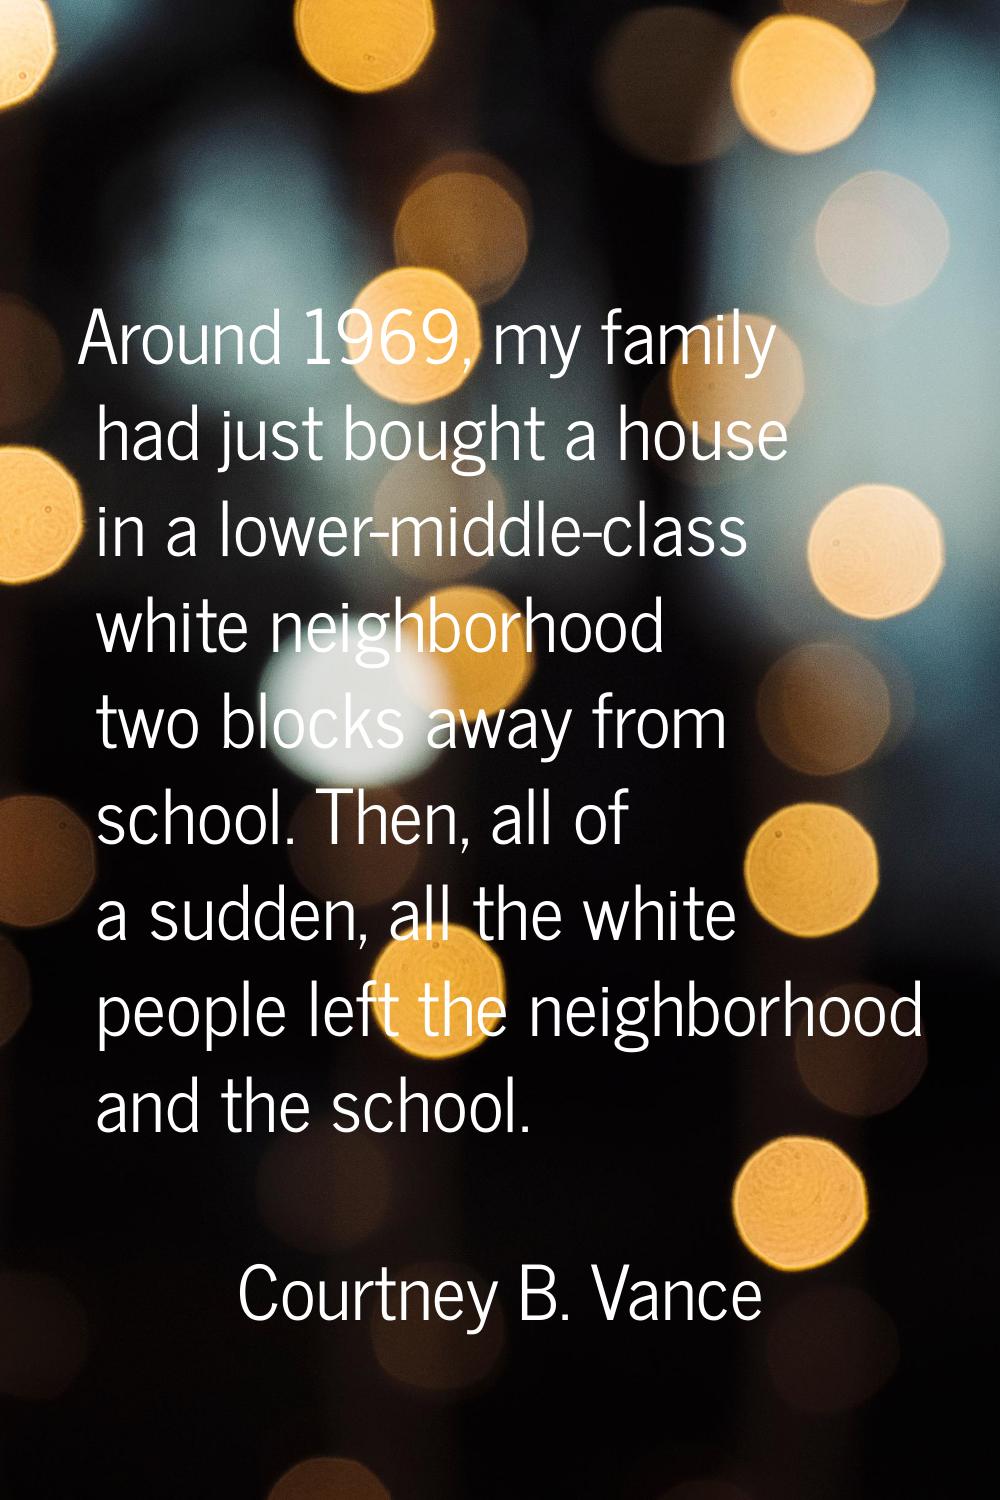 Around 1969, my family had just bought a house in a lower-middle-class white neighborhood two block